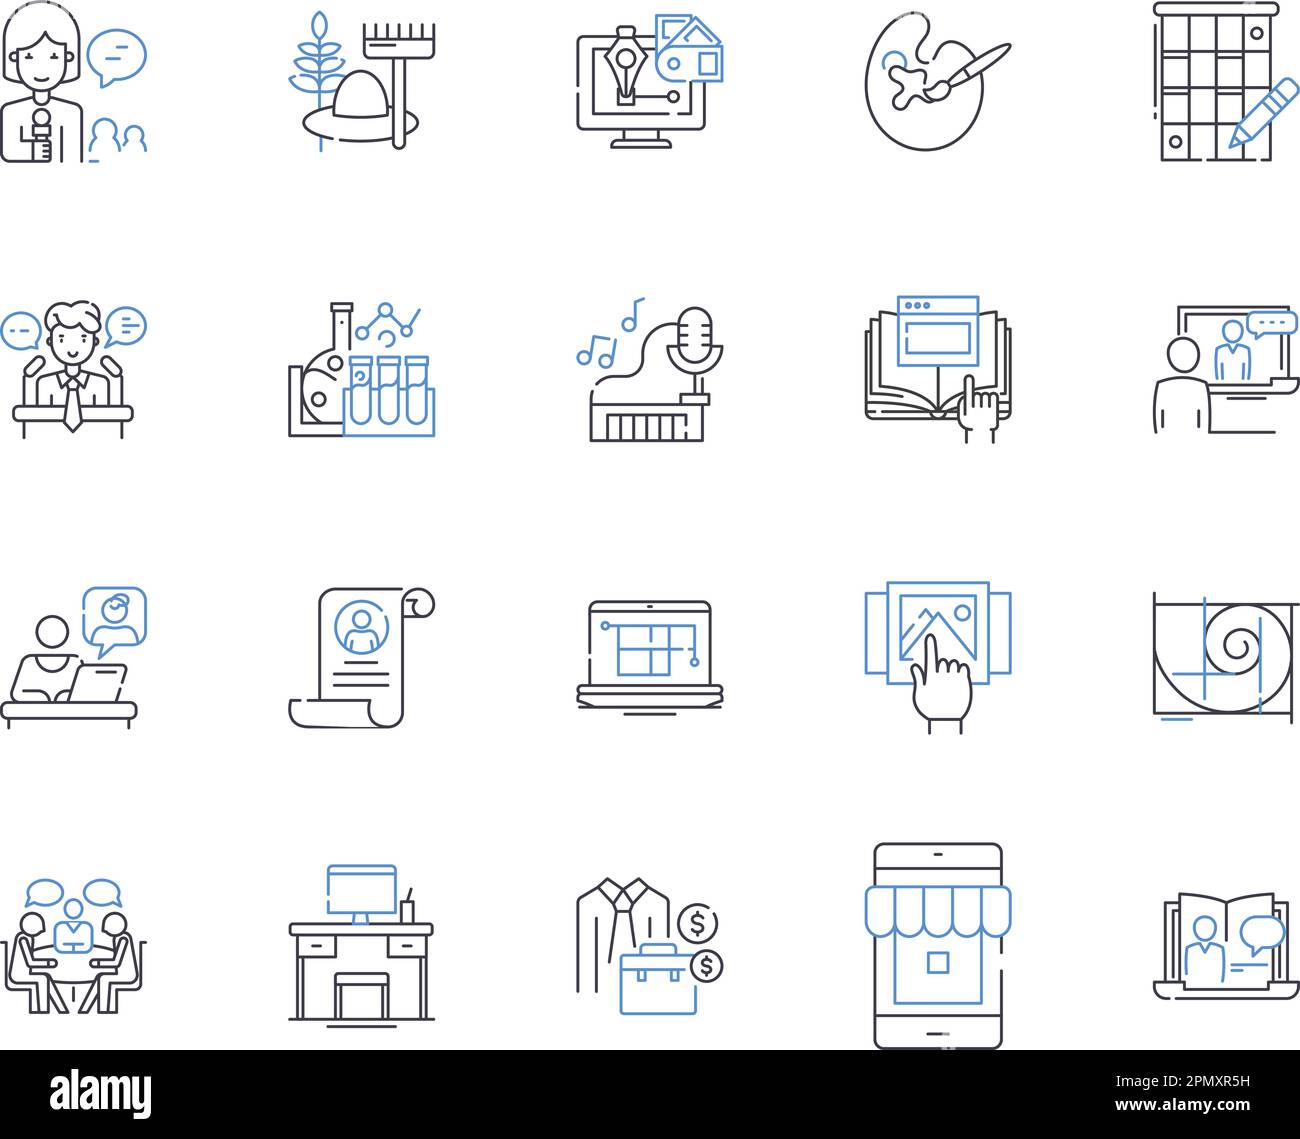 Freelance and work outline icons collection. Freelance, work, freelancer, job, remote, independent, self-employed vector and illustration concept set Stock Vector